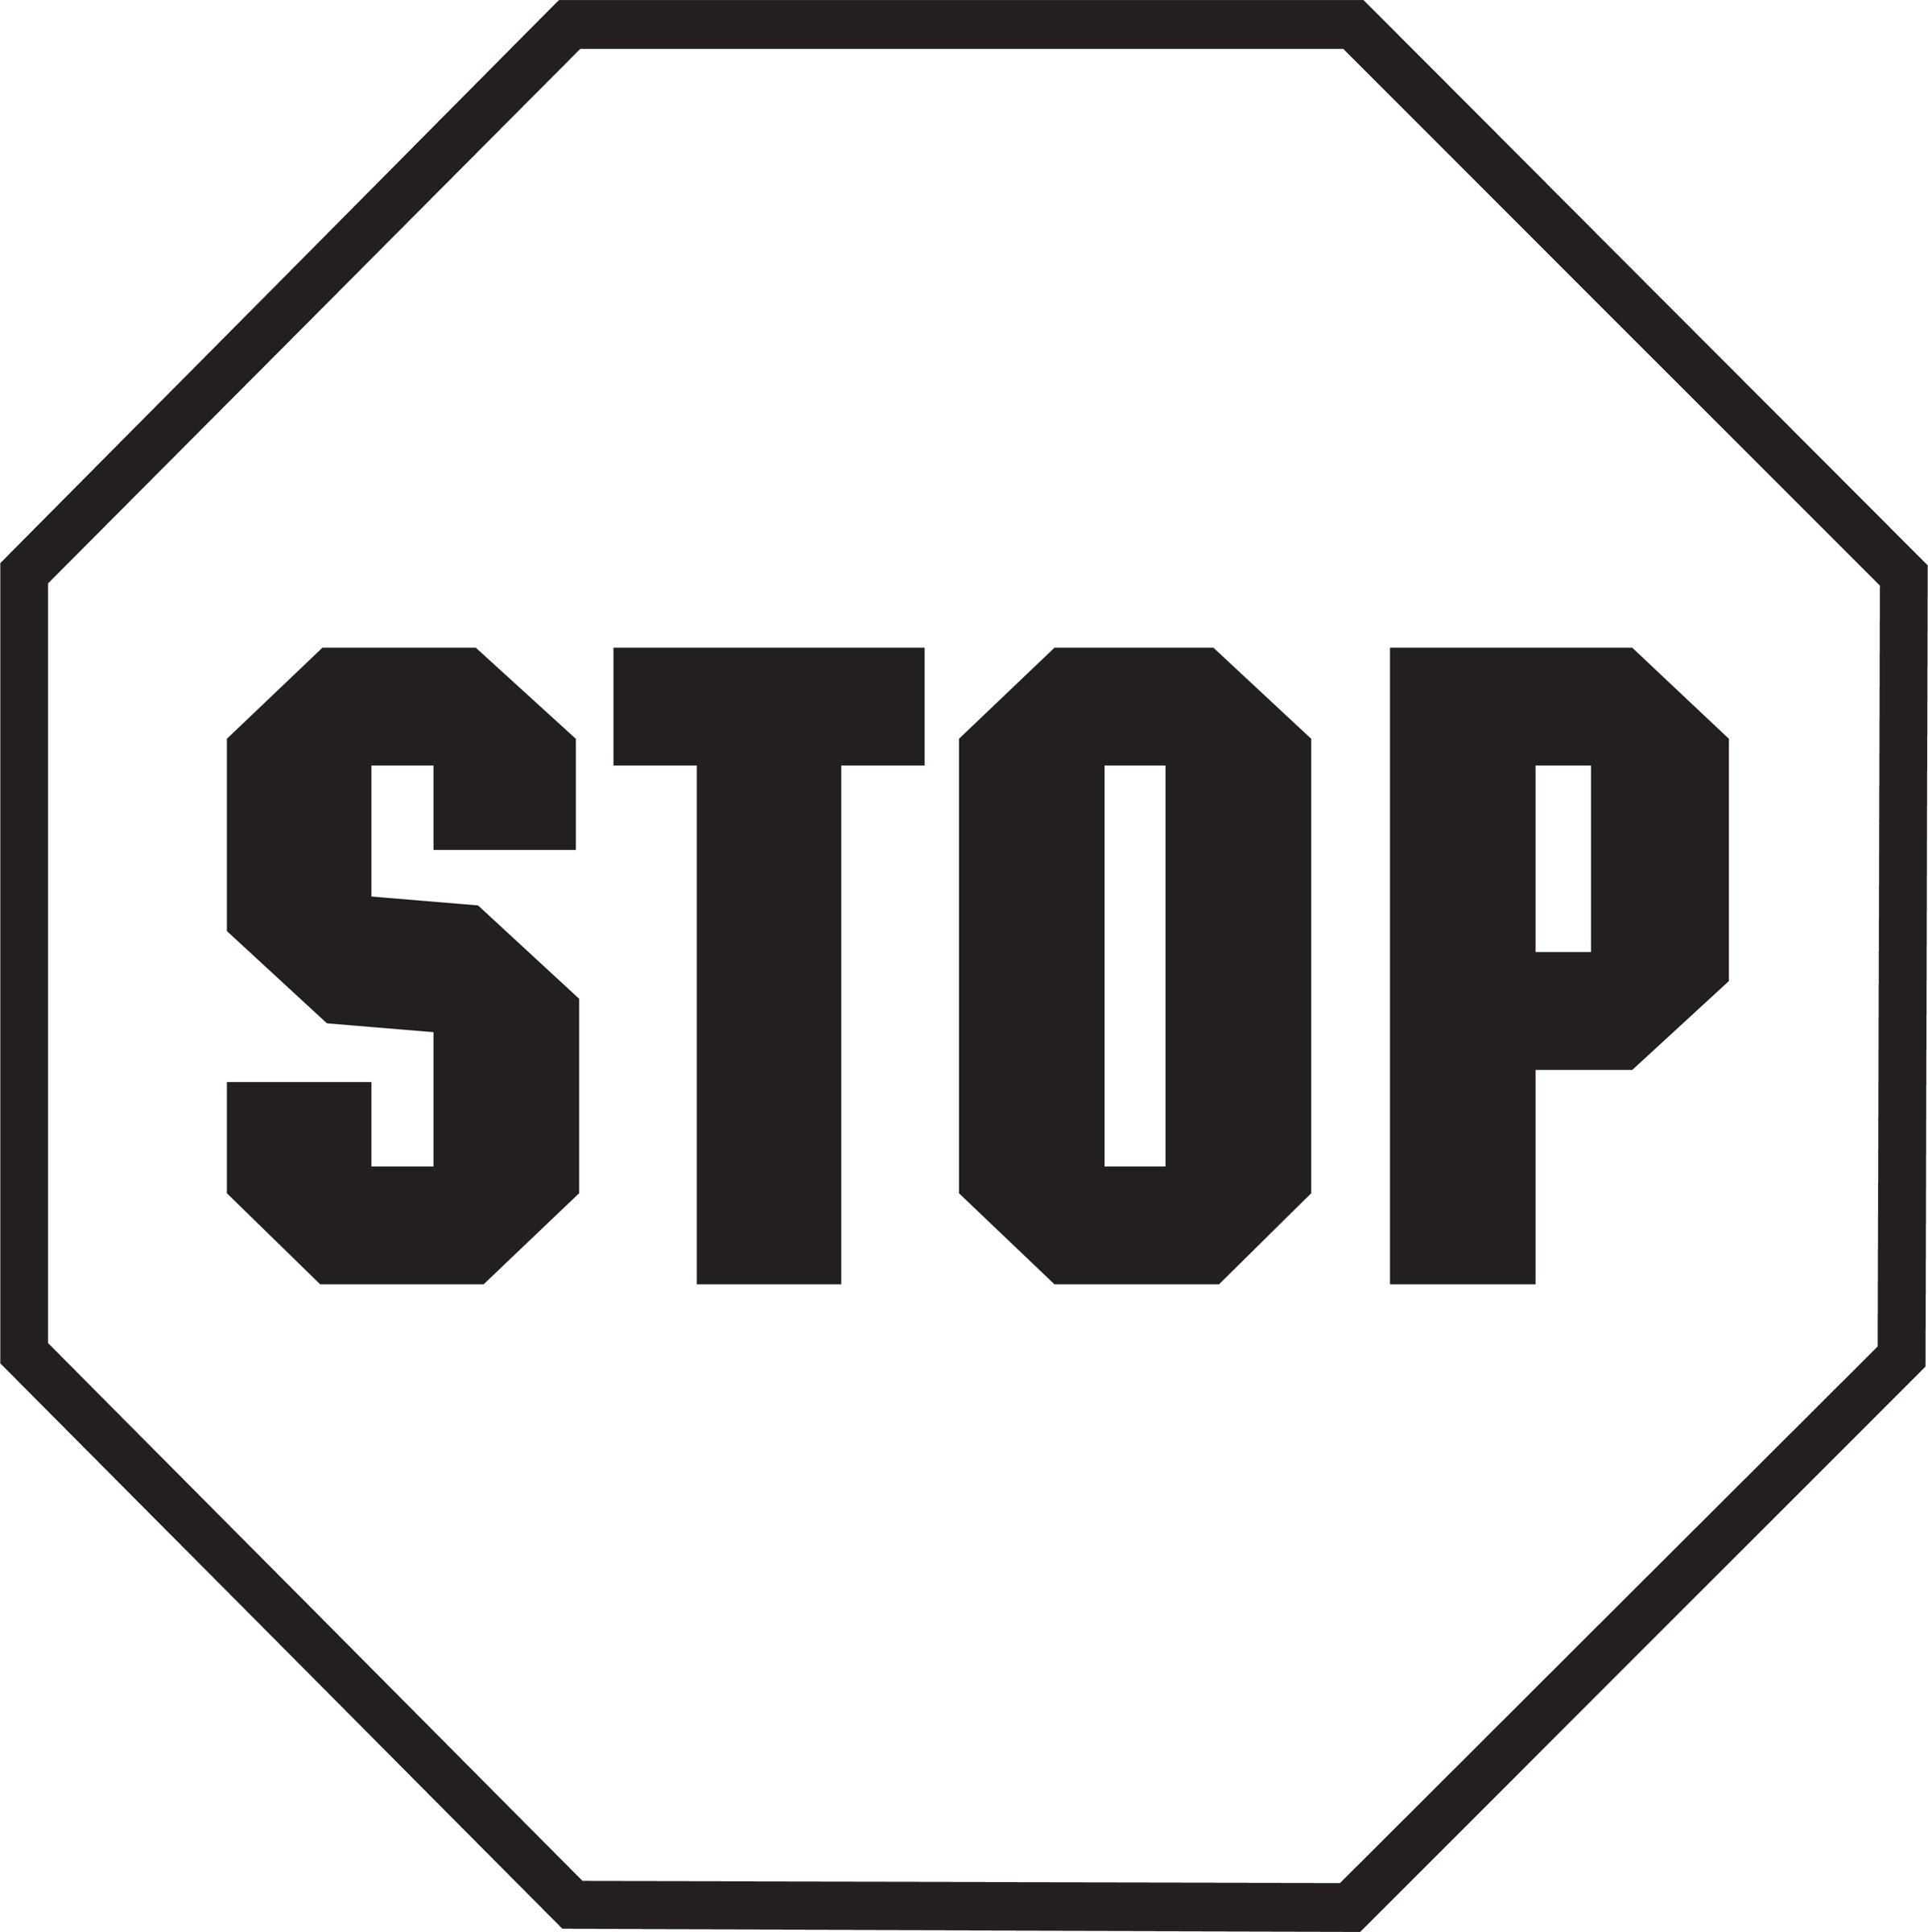 Images stop signs clipart - FamClipart